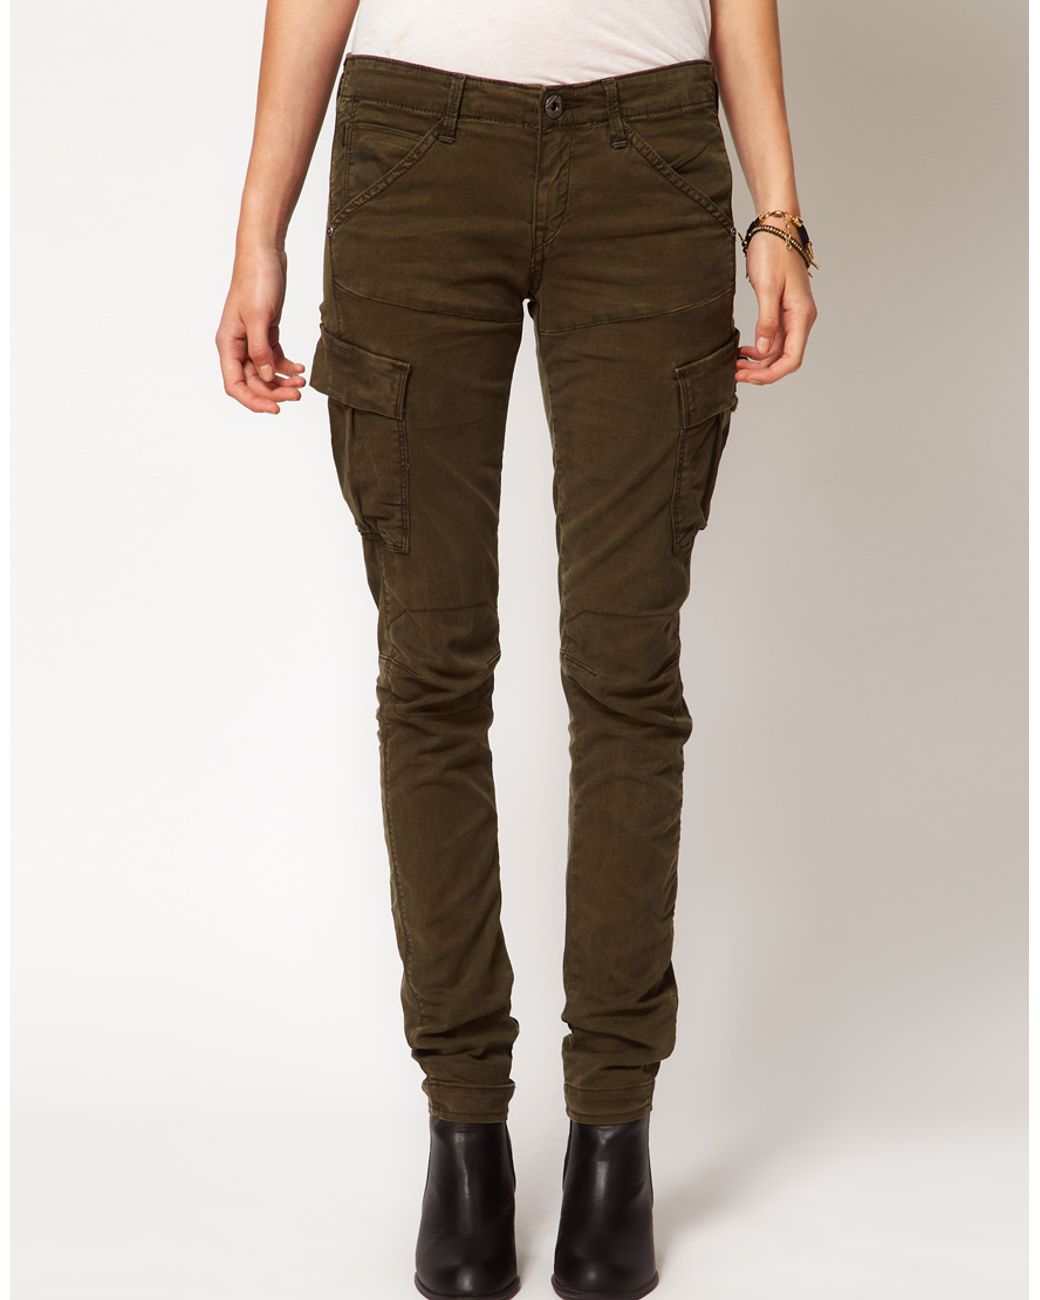 HighWaisted Wow Skinny Pants for Women  Old Navy